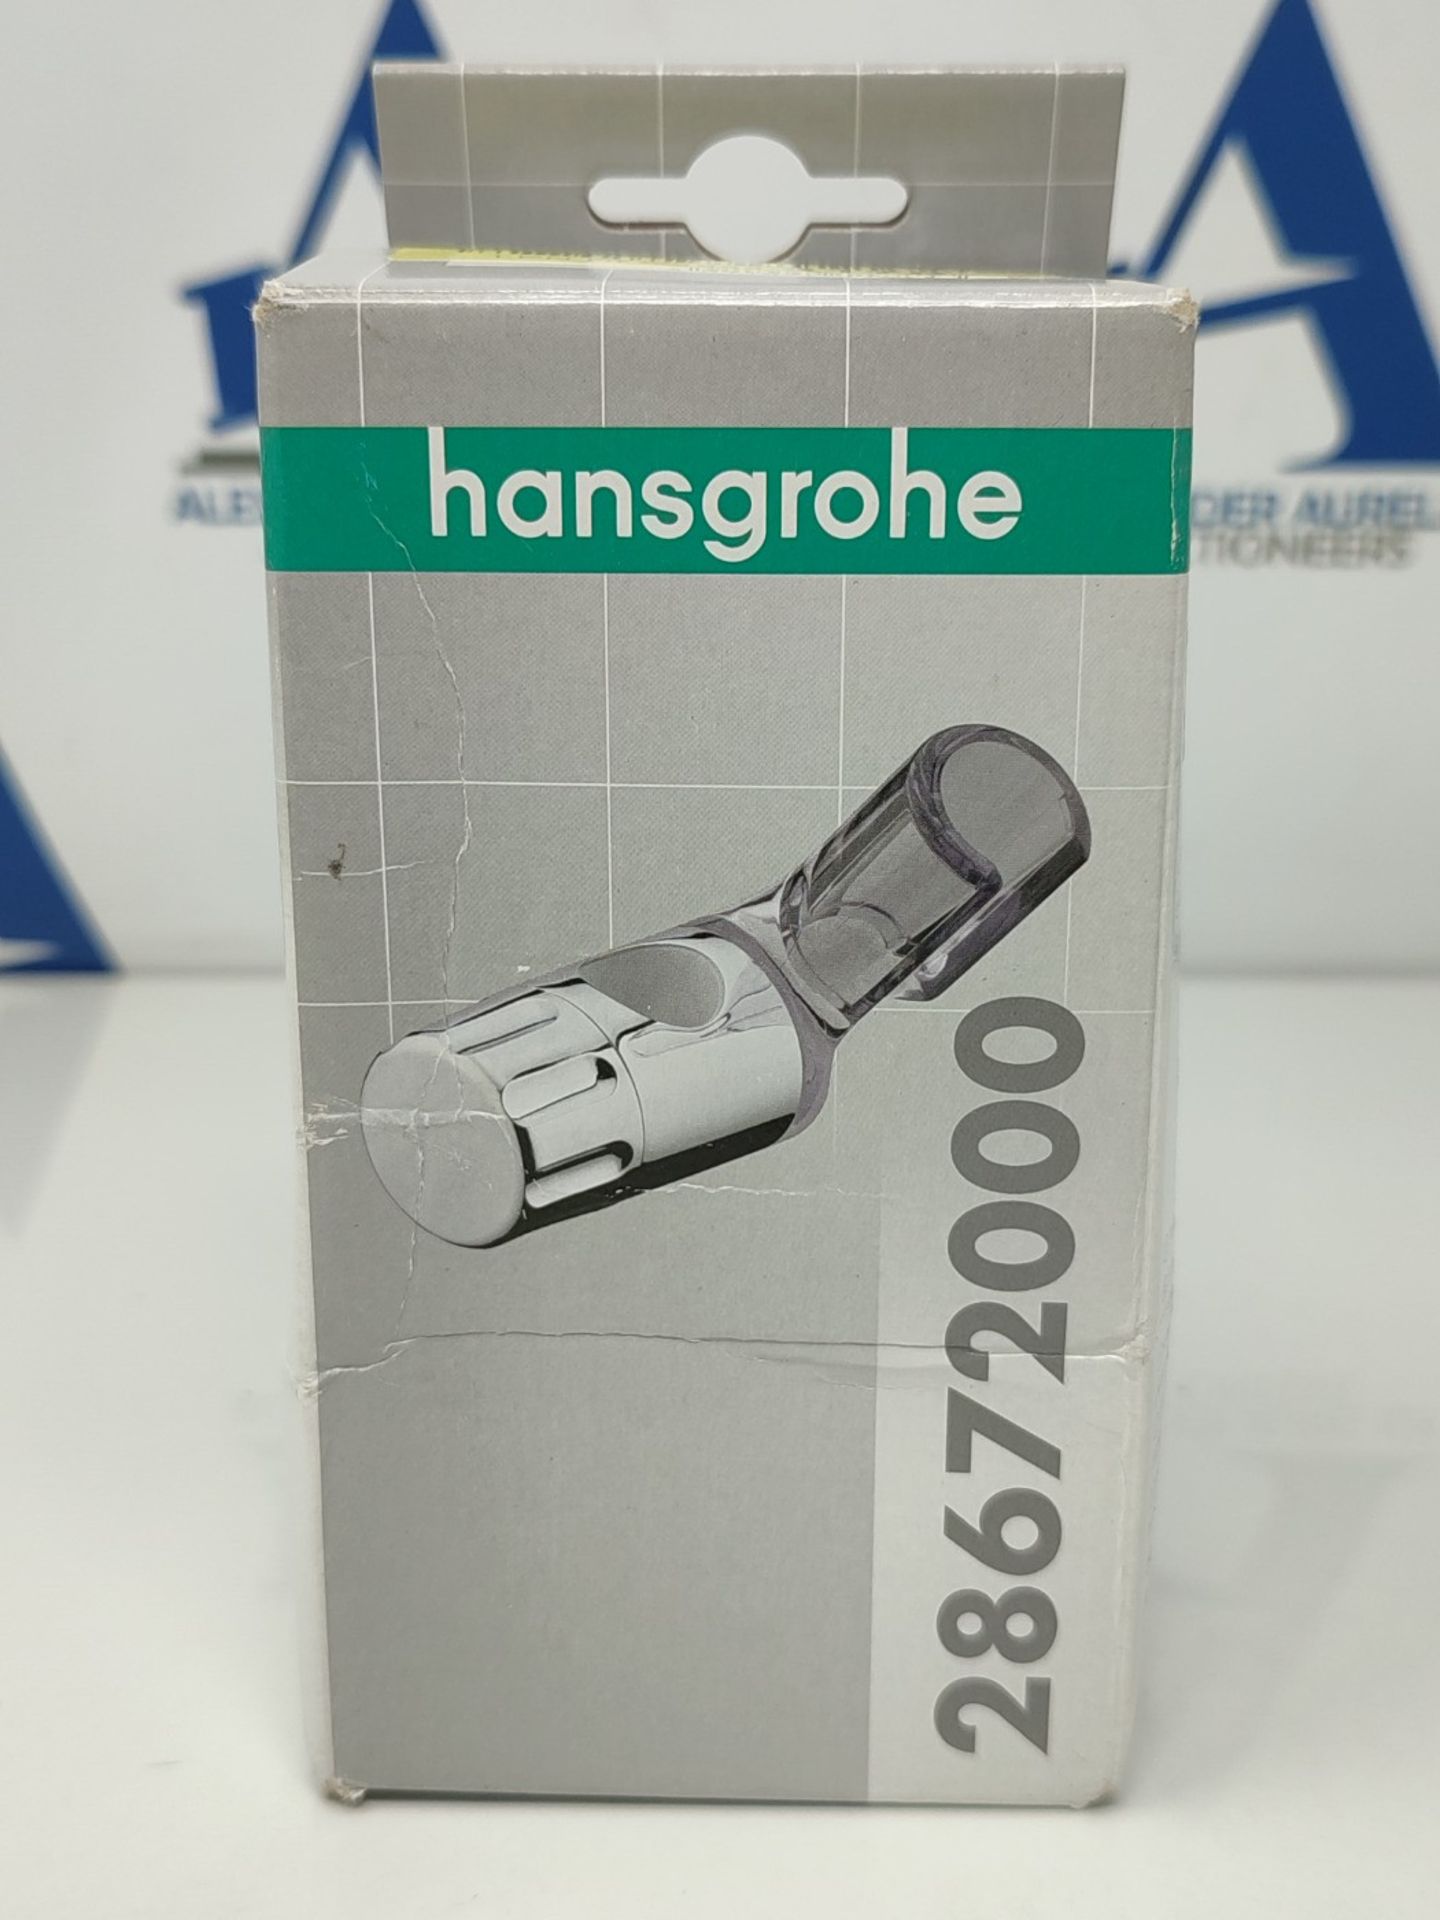 H. GROHE 28672000 hansgrohe Slider for Unica'88 Shower Rail, Chrome - Image 2 of 3